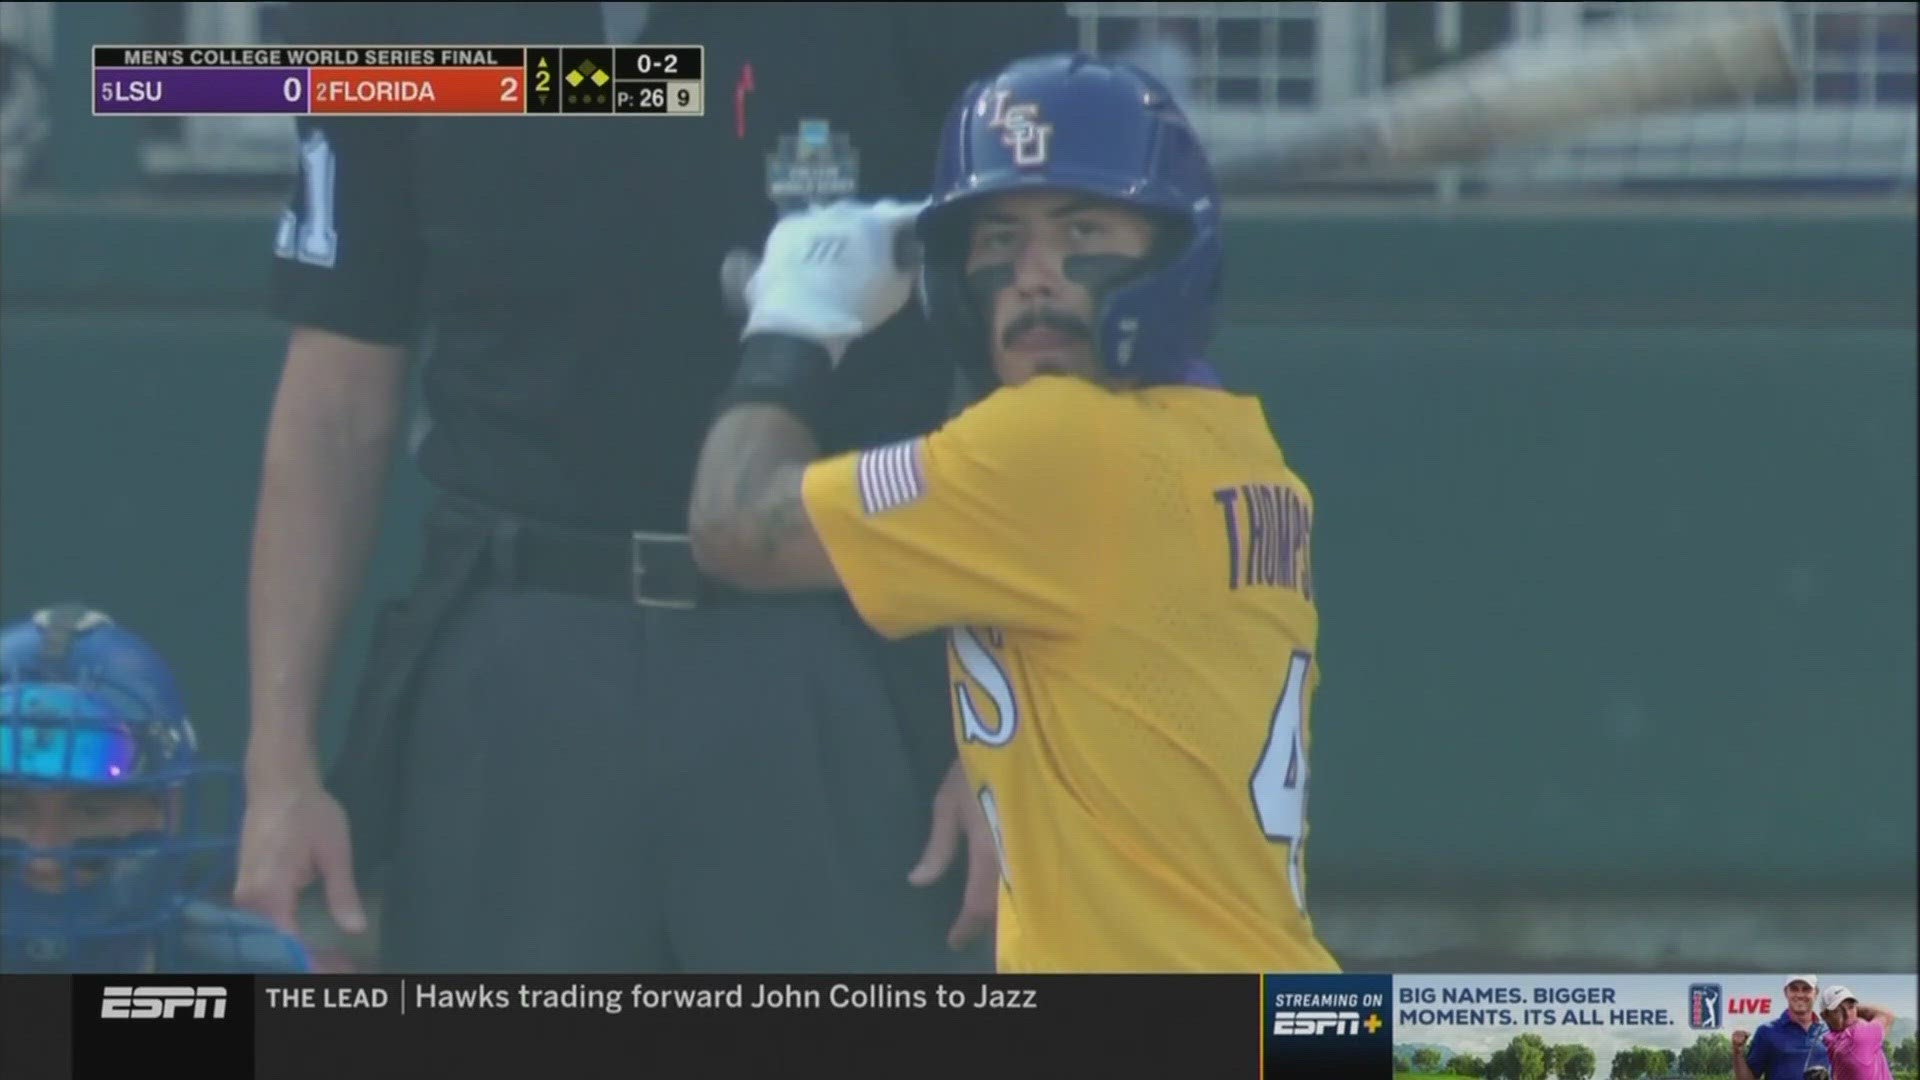 Florida Baseball: Highlights from College World Series vs LSU Game 1